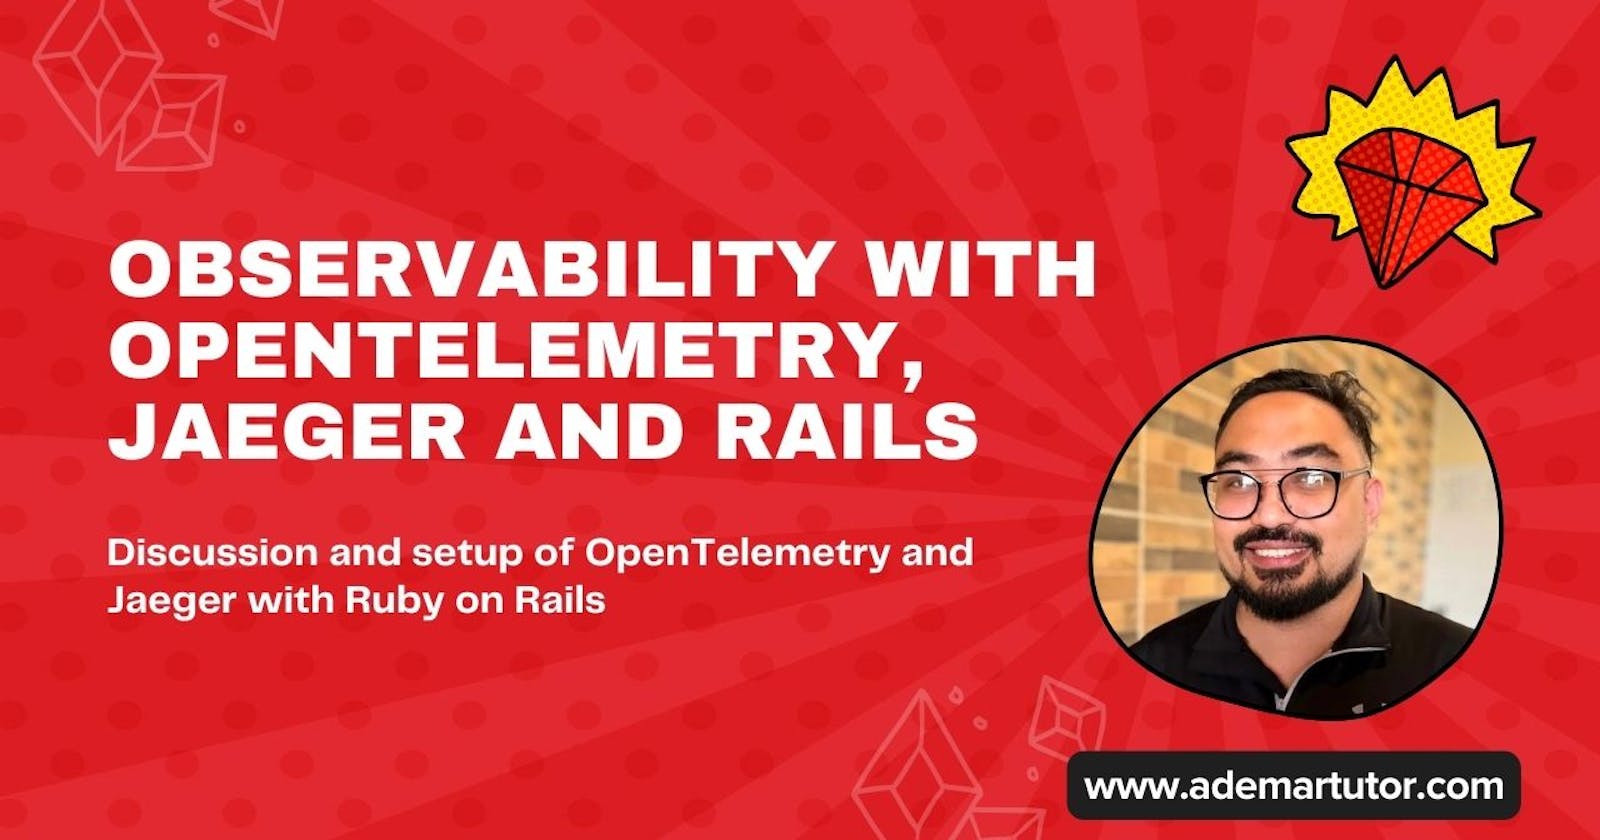 Observability with OpenTelemetry, Jaeger, and Rails